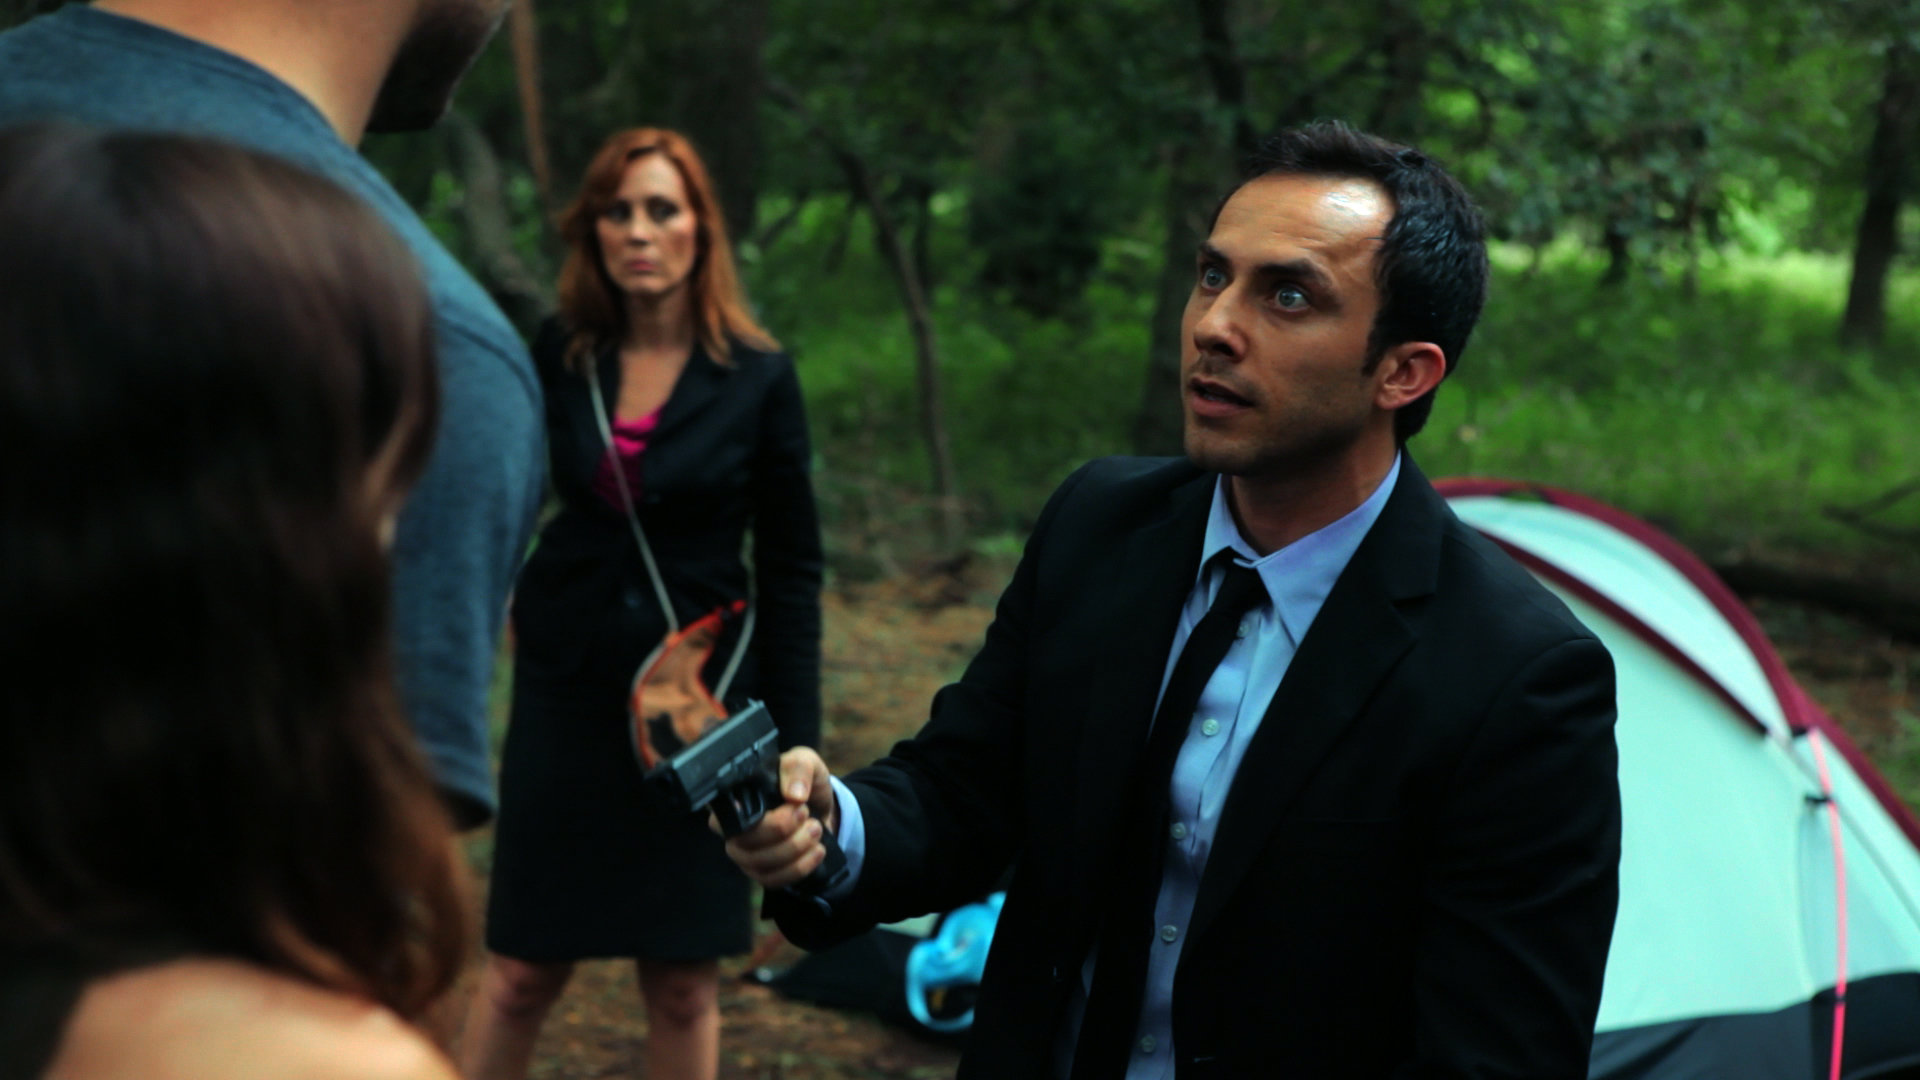 Stephanie Barone and Robin Zamora in The Survival Game (2012)